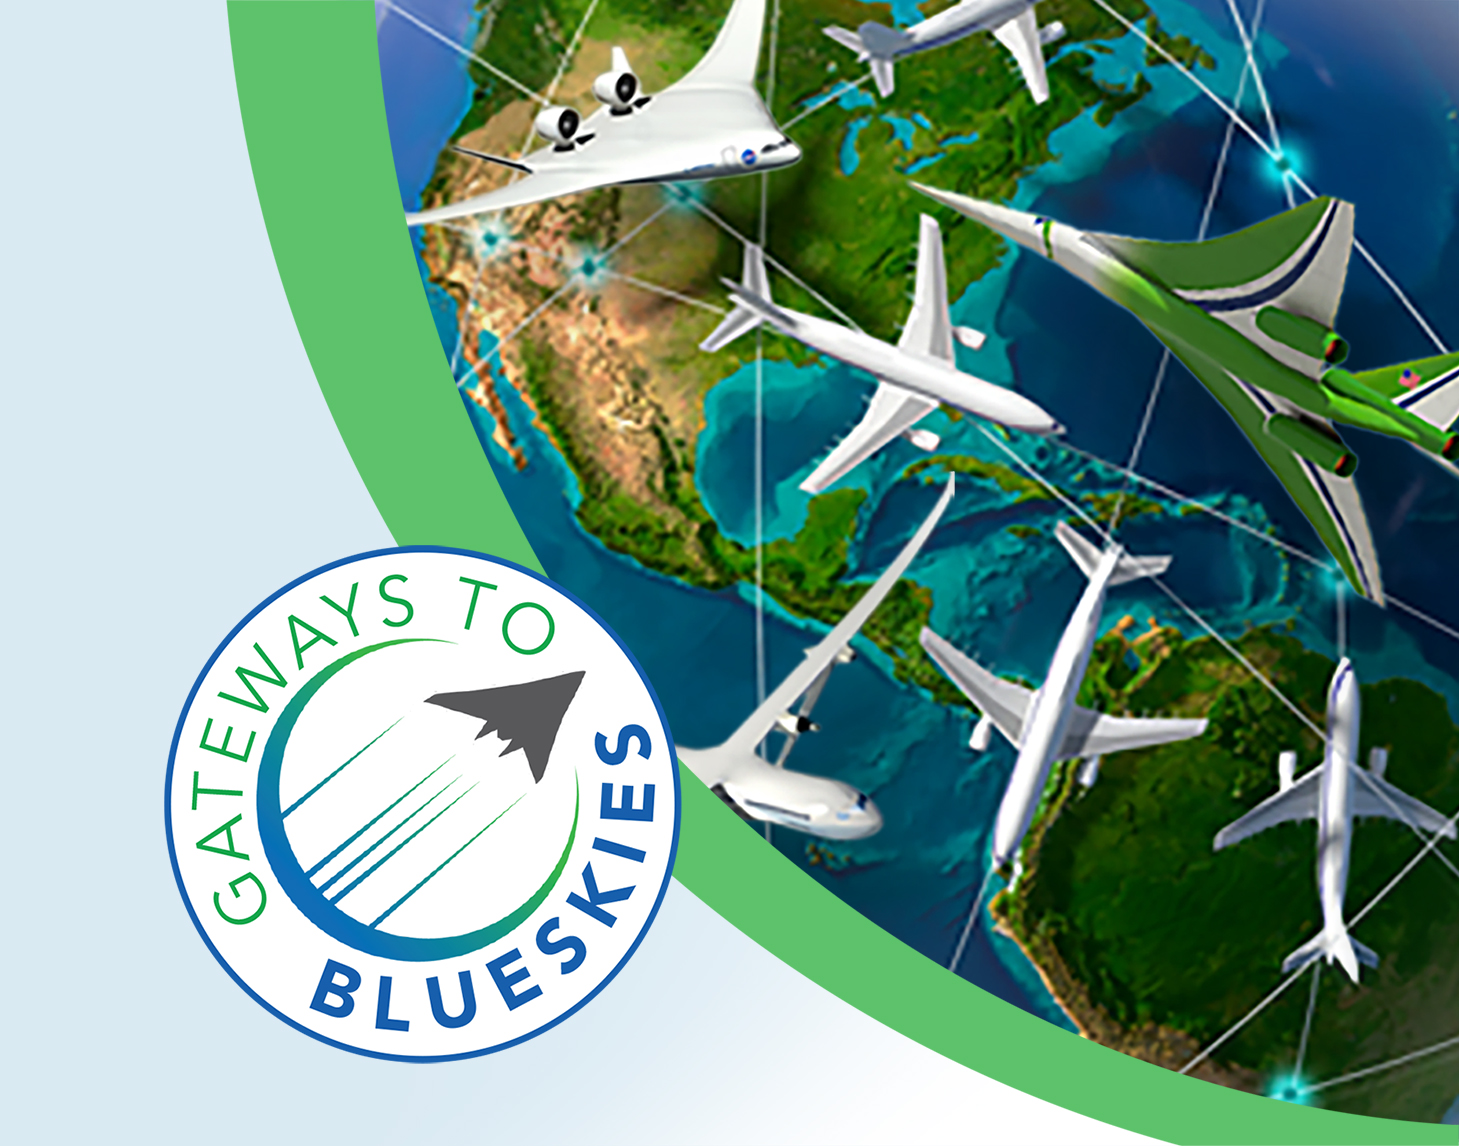 Graphic showing an artist illustration of a partial globe (earth) with various airplanes in flight all around. Outside the globe is the Gateway to Blueskies logo.